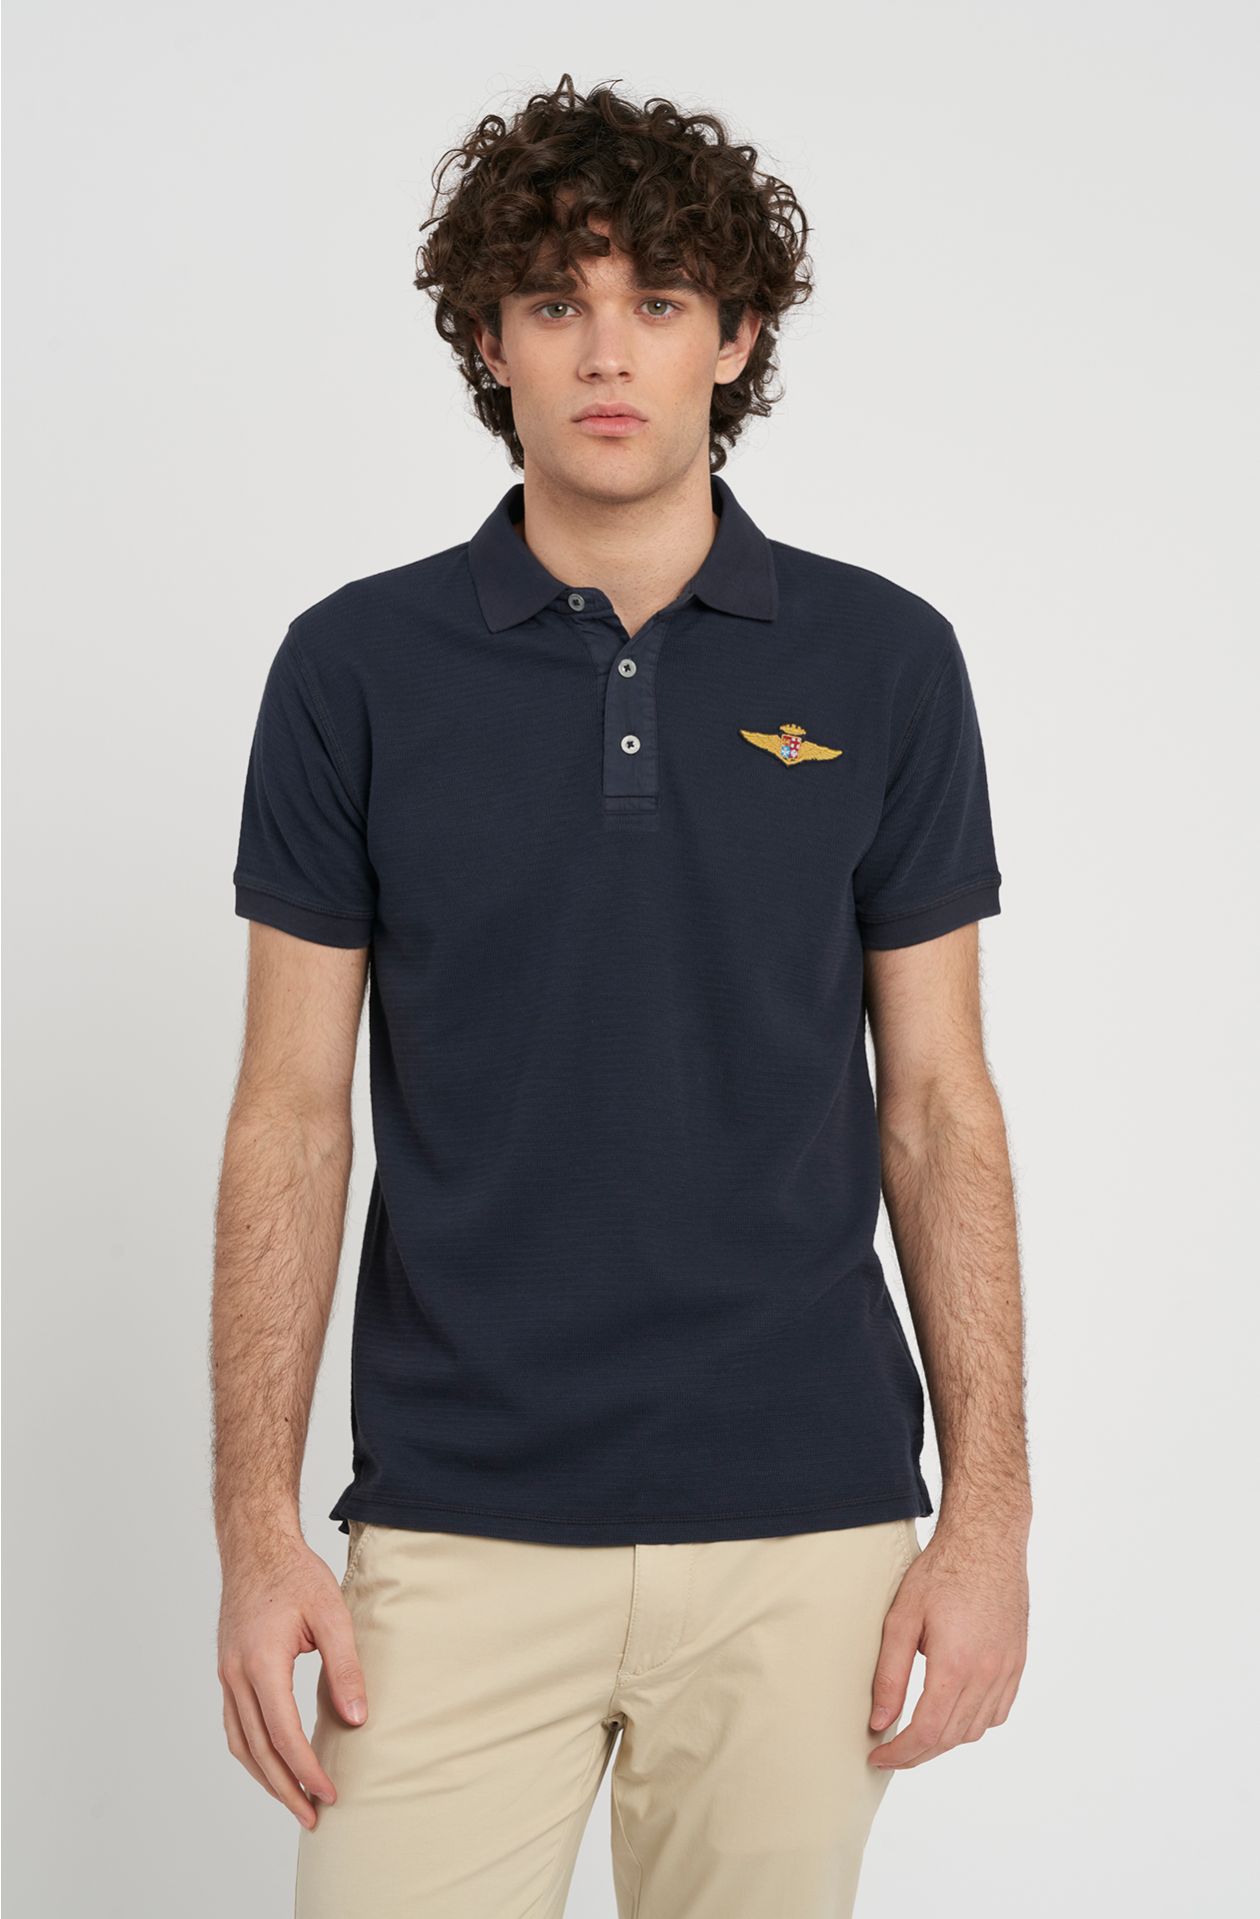 Naval Aviation polo shirt in cotton